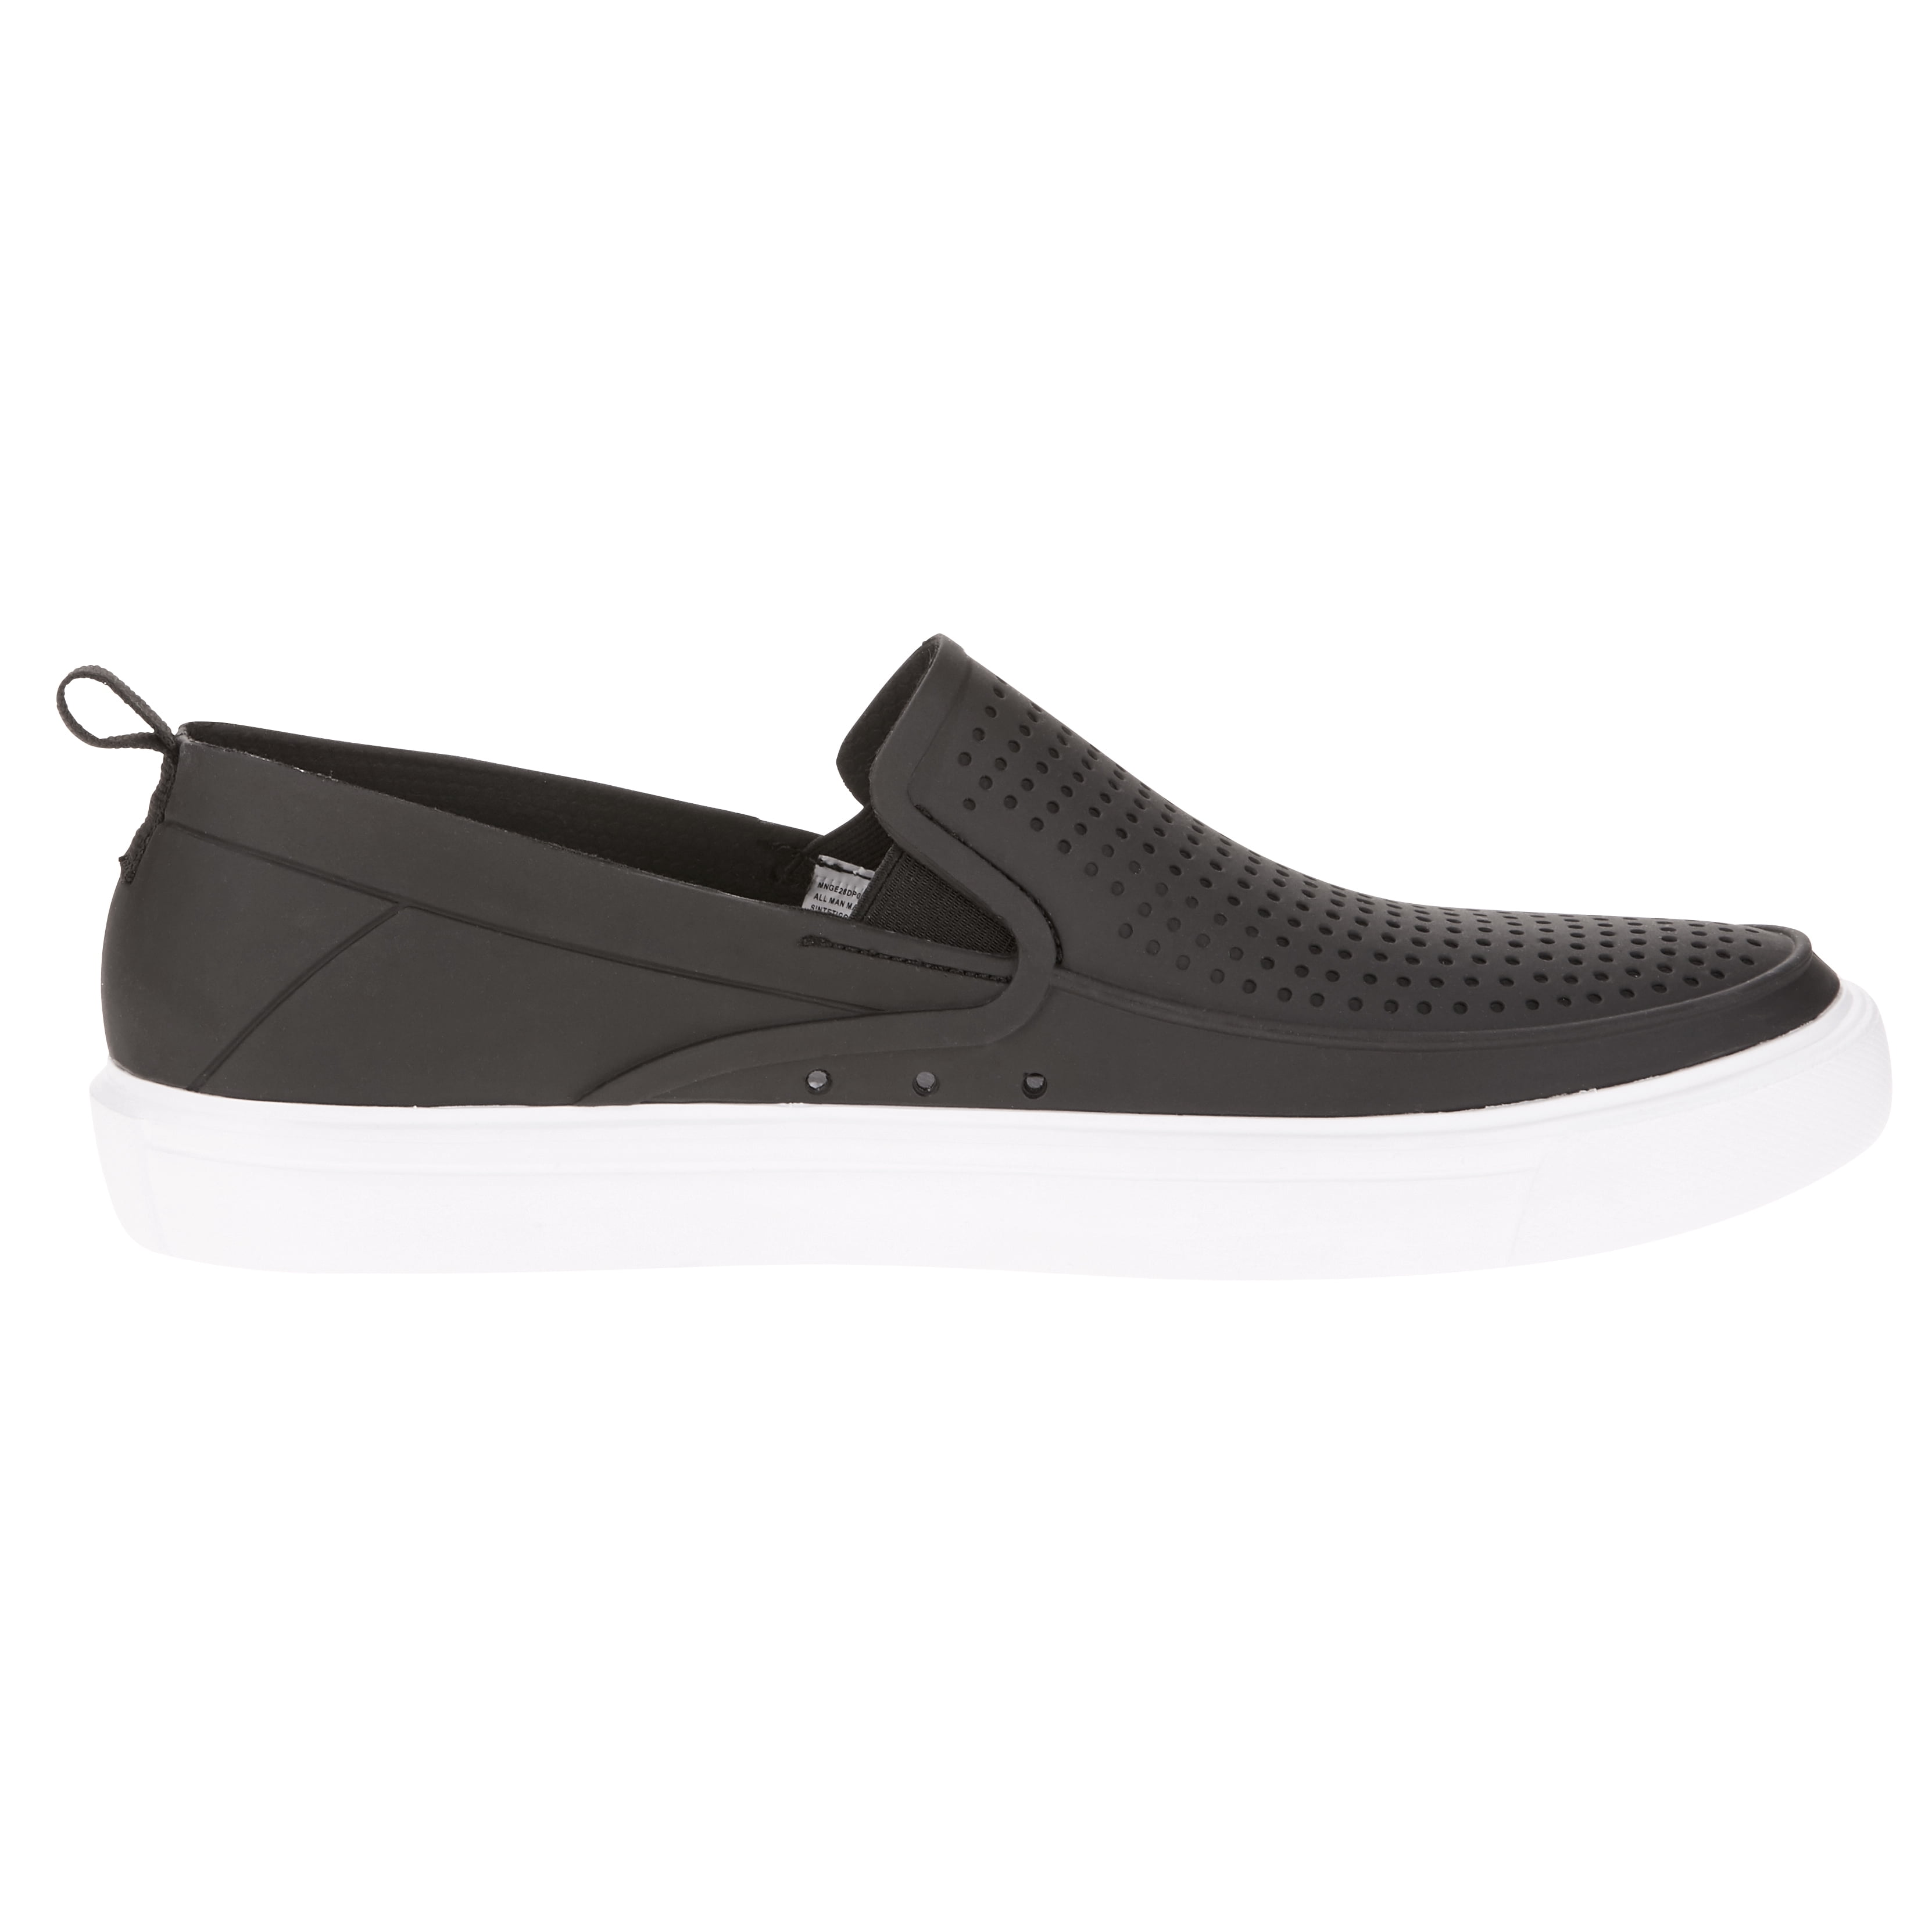 George Men's Casual Perforated Slip-On 